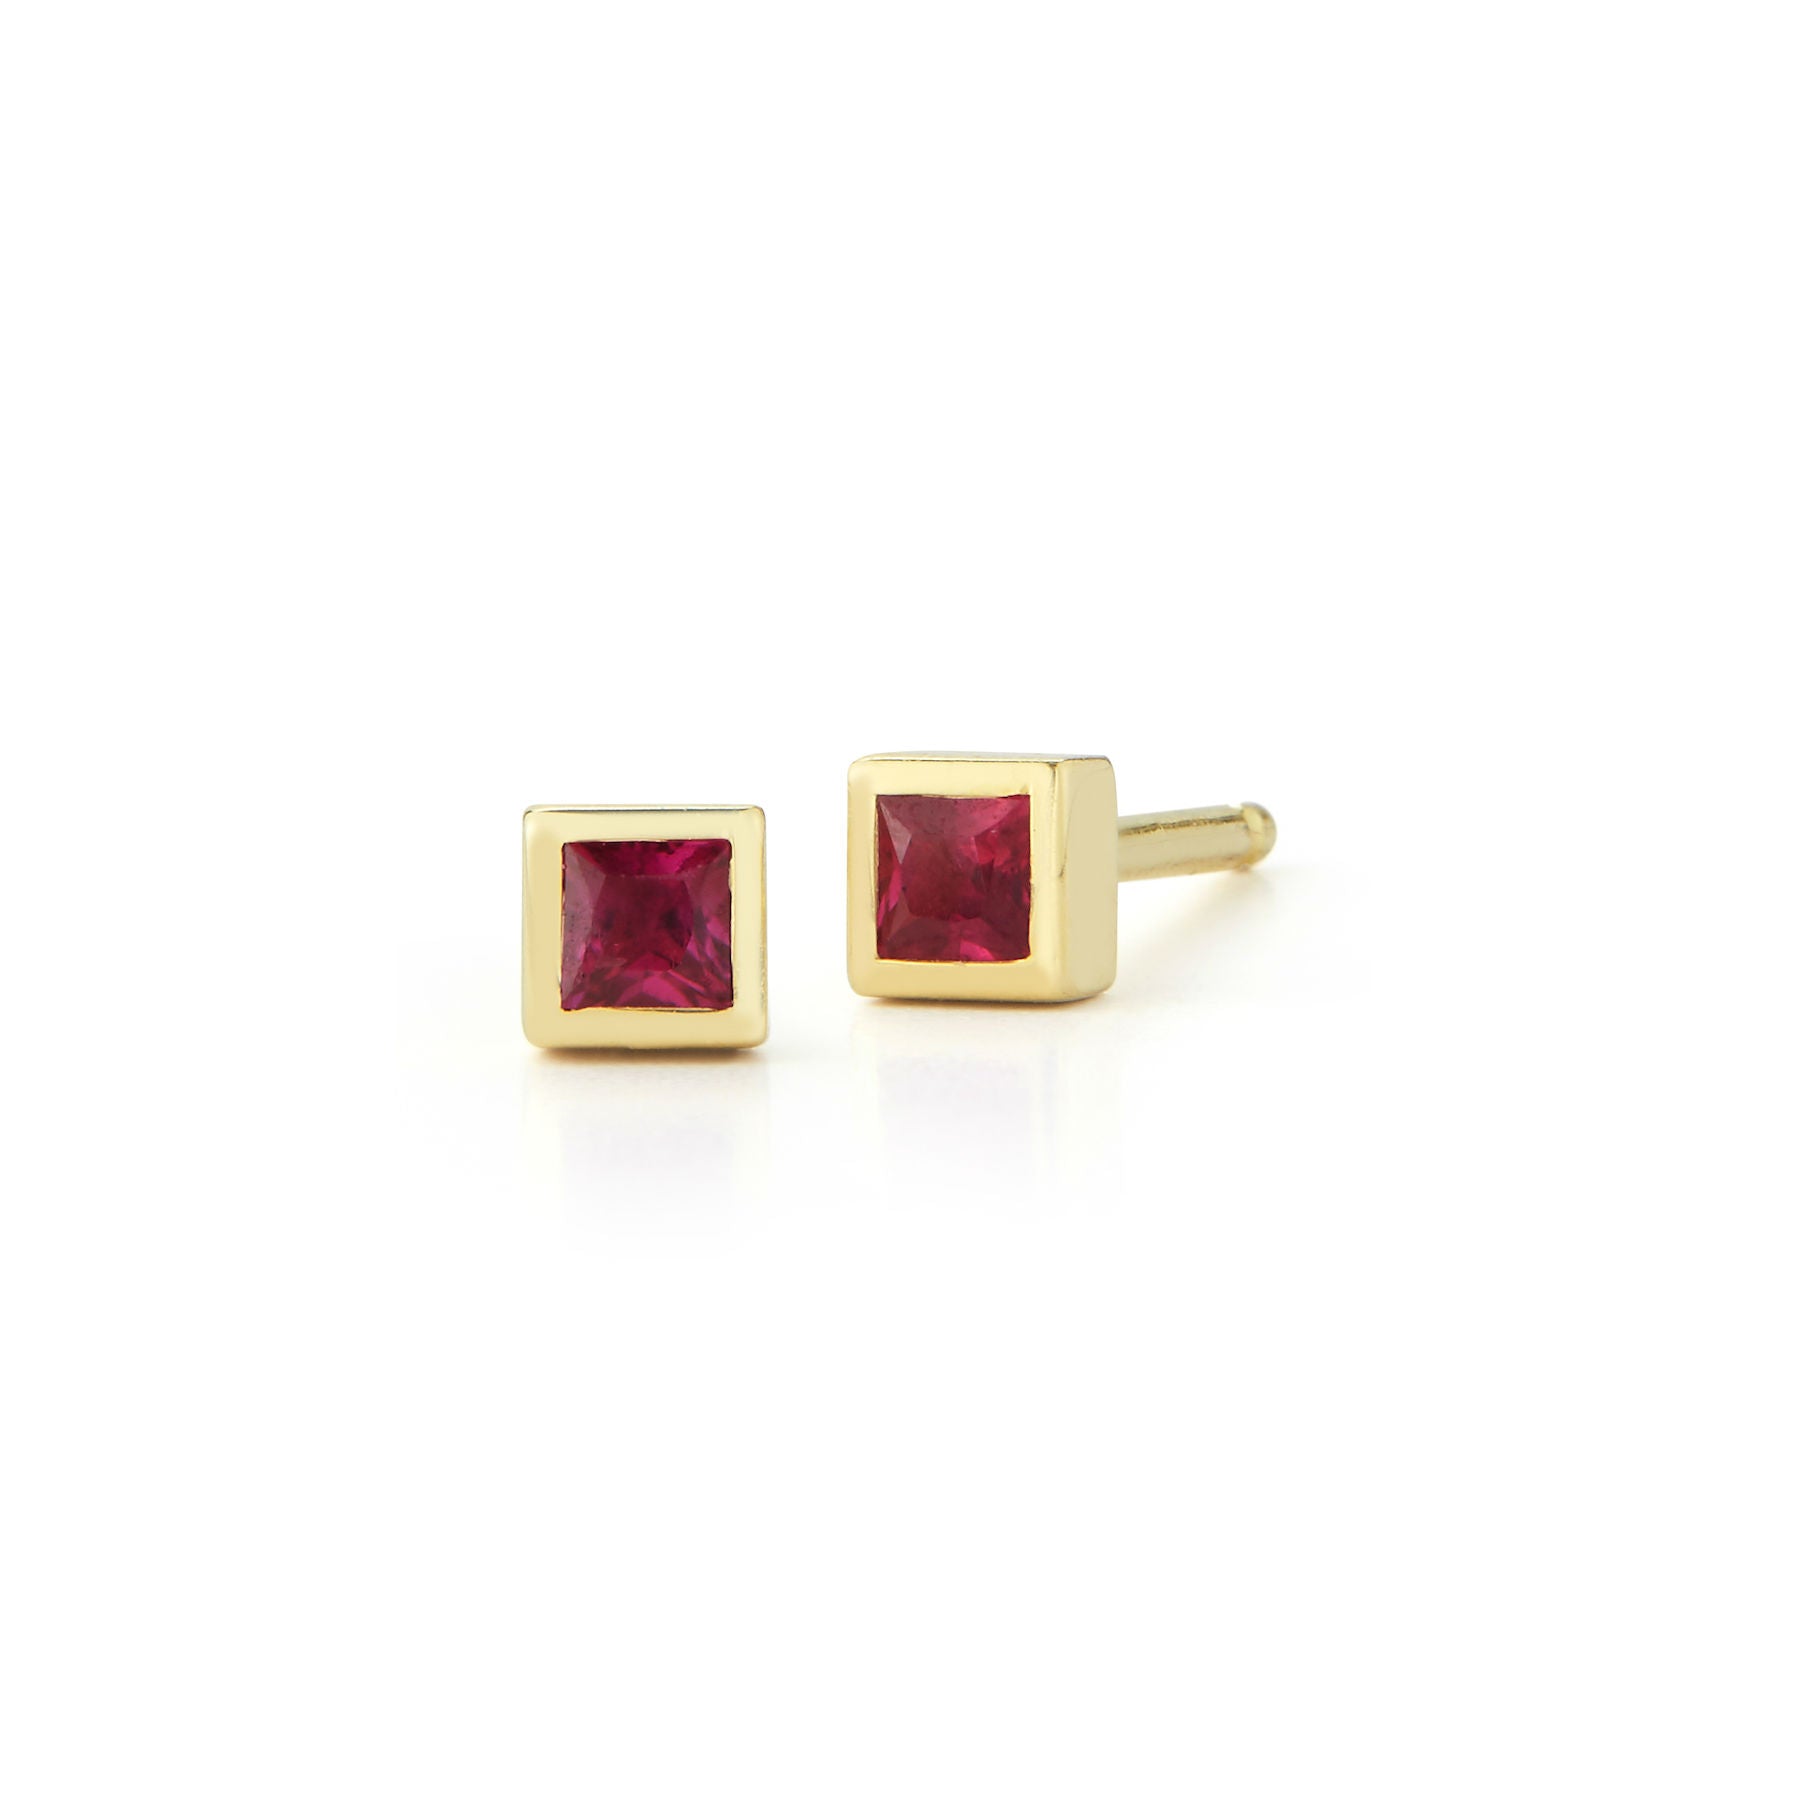 14k rose gold 2mm square ruby micro stud earring by Finn by Candice Pool Nesitat perfect for Valentines Day